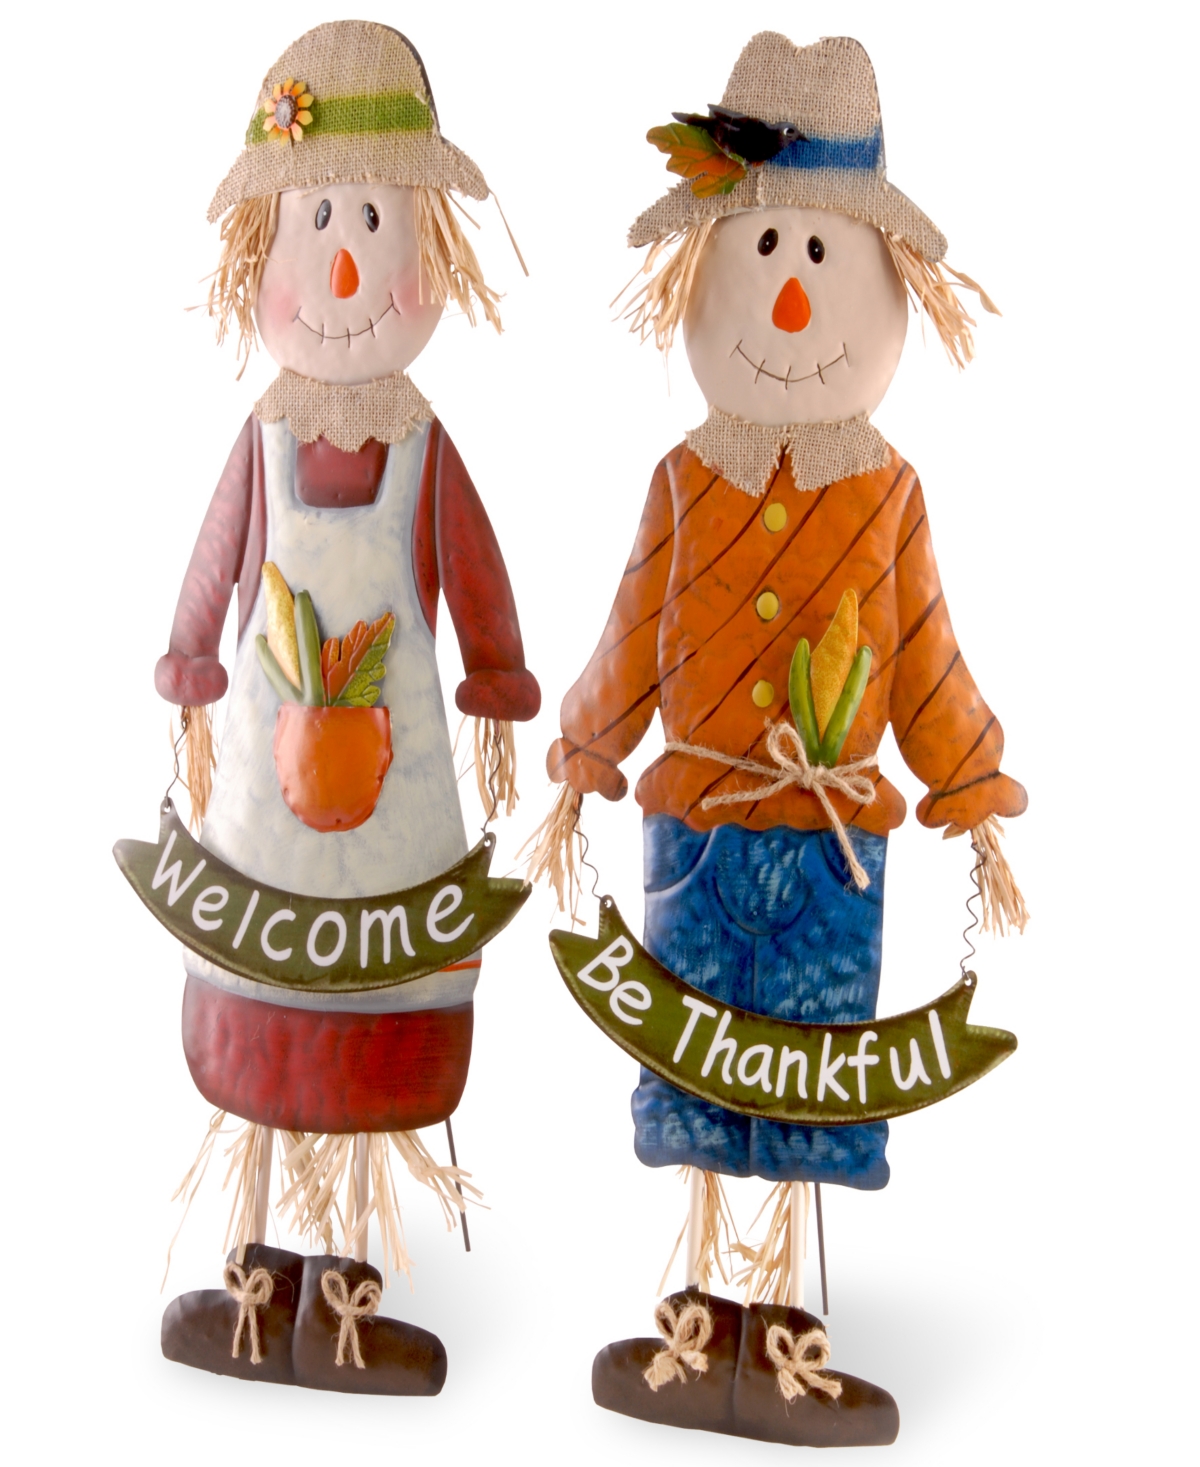 27" Metal Scarecrow Standing Fall Decoration, Pack of 2, Autumn Collection - Multicolor